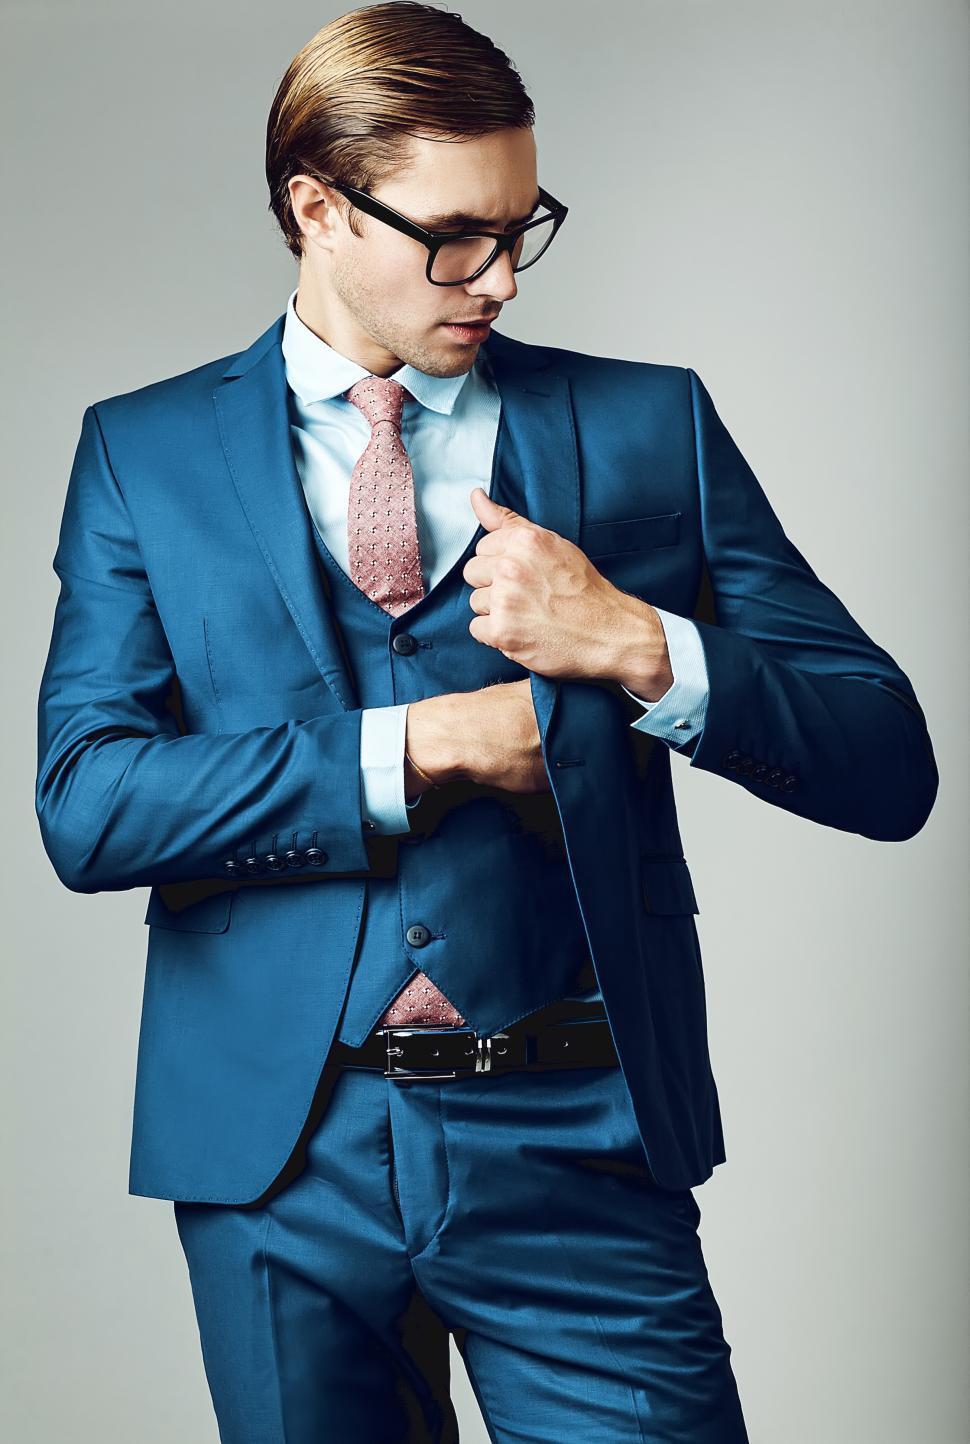 Free Image of A man in a blue suit 